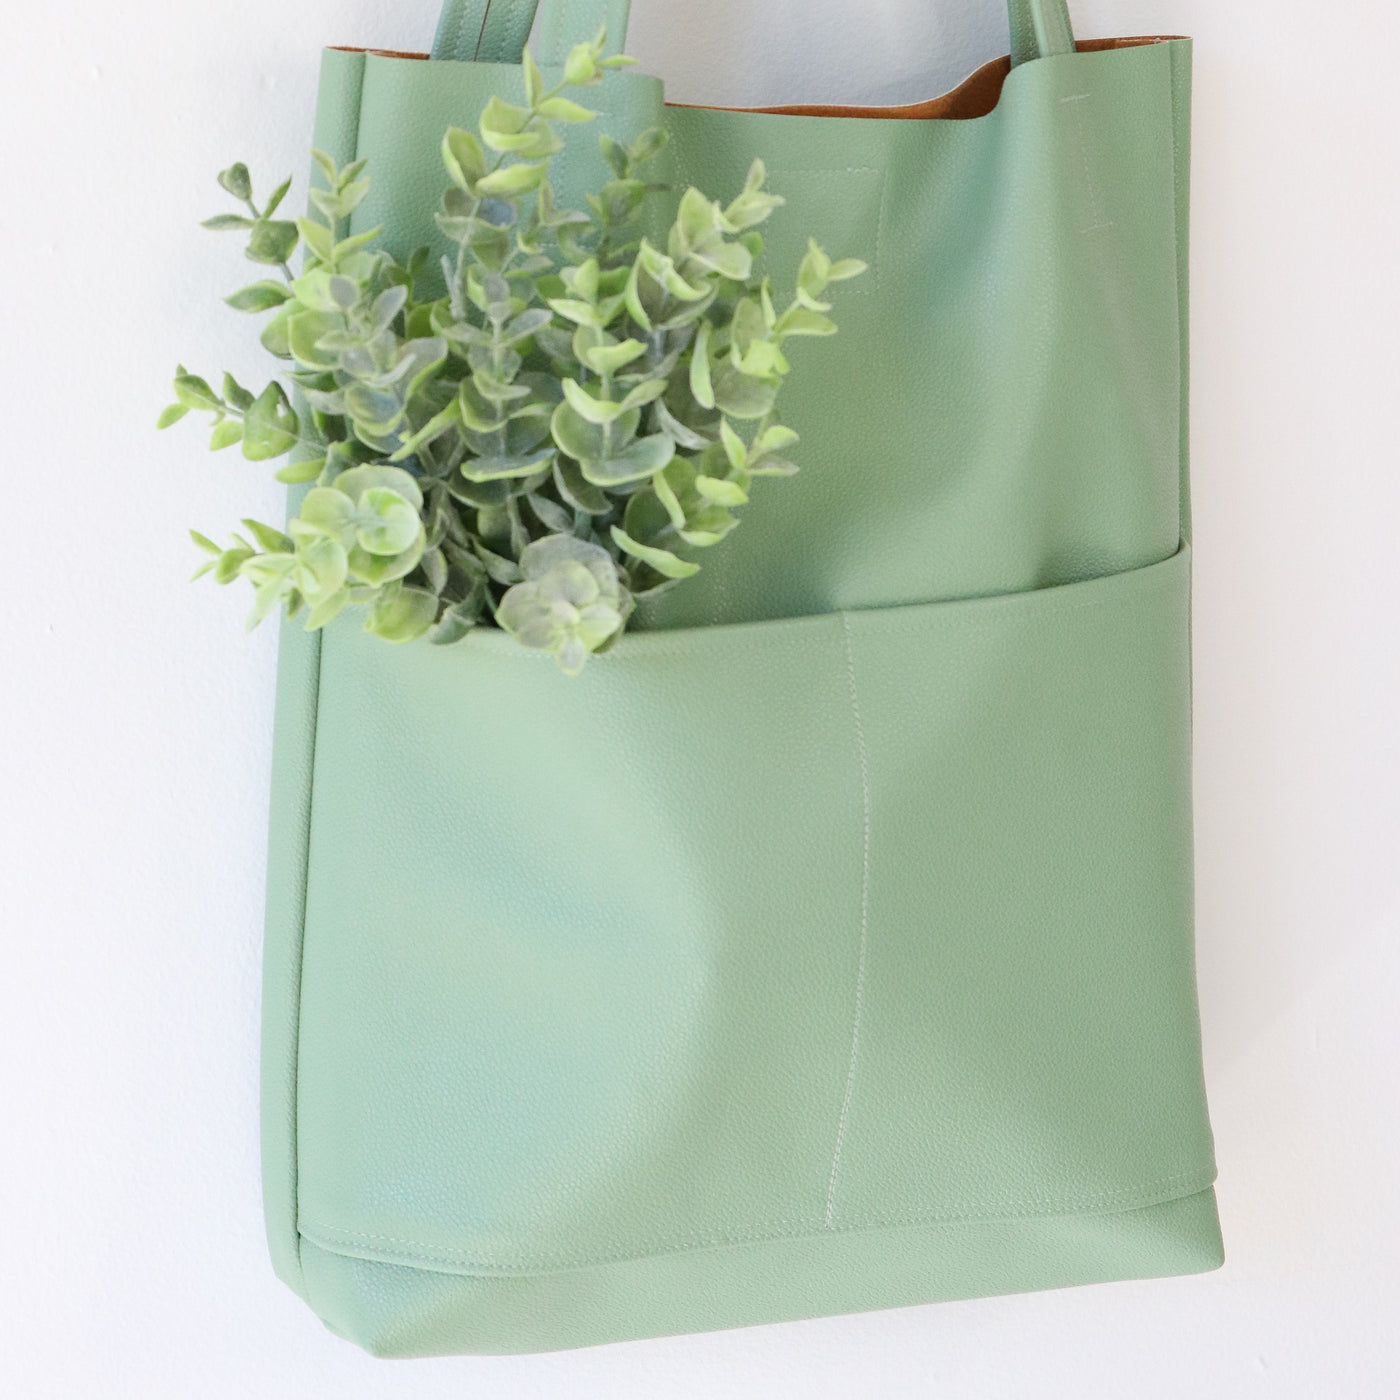 DIY Easy Tote Bag - Feature Cork Fabric or Faux Leather 